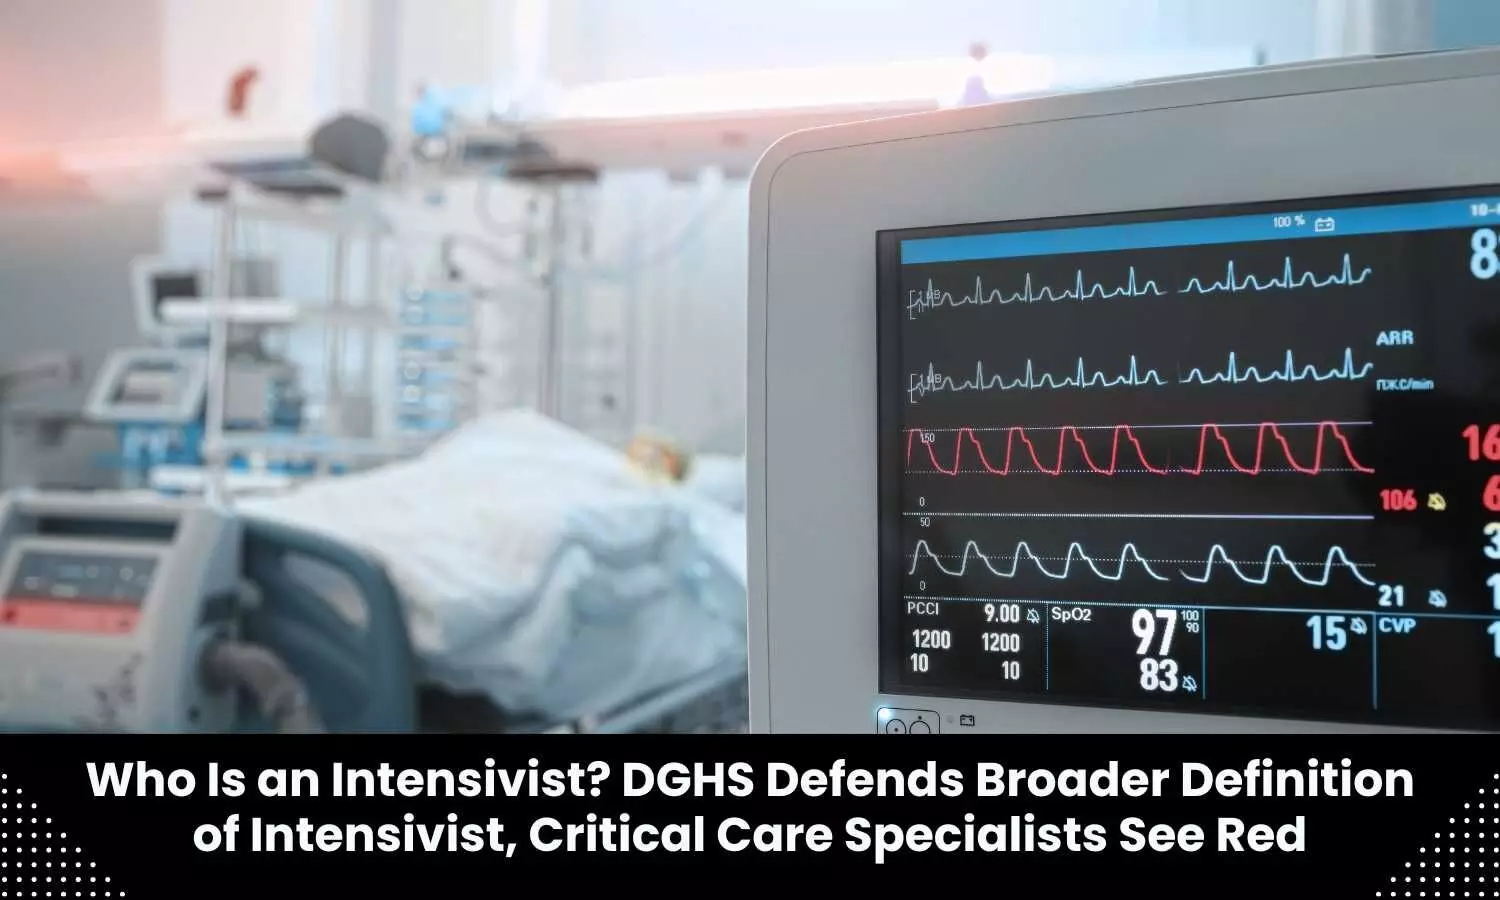 DGHS defends broader definition of Intensivist, Critical Care Specialists see red